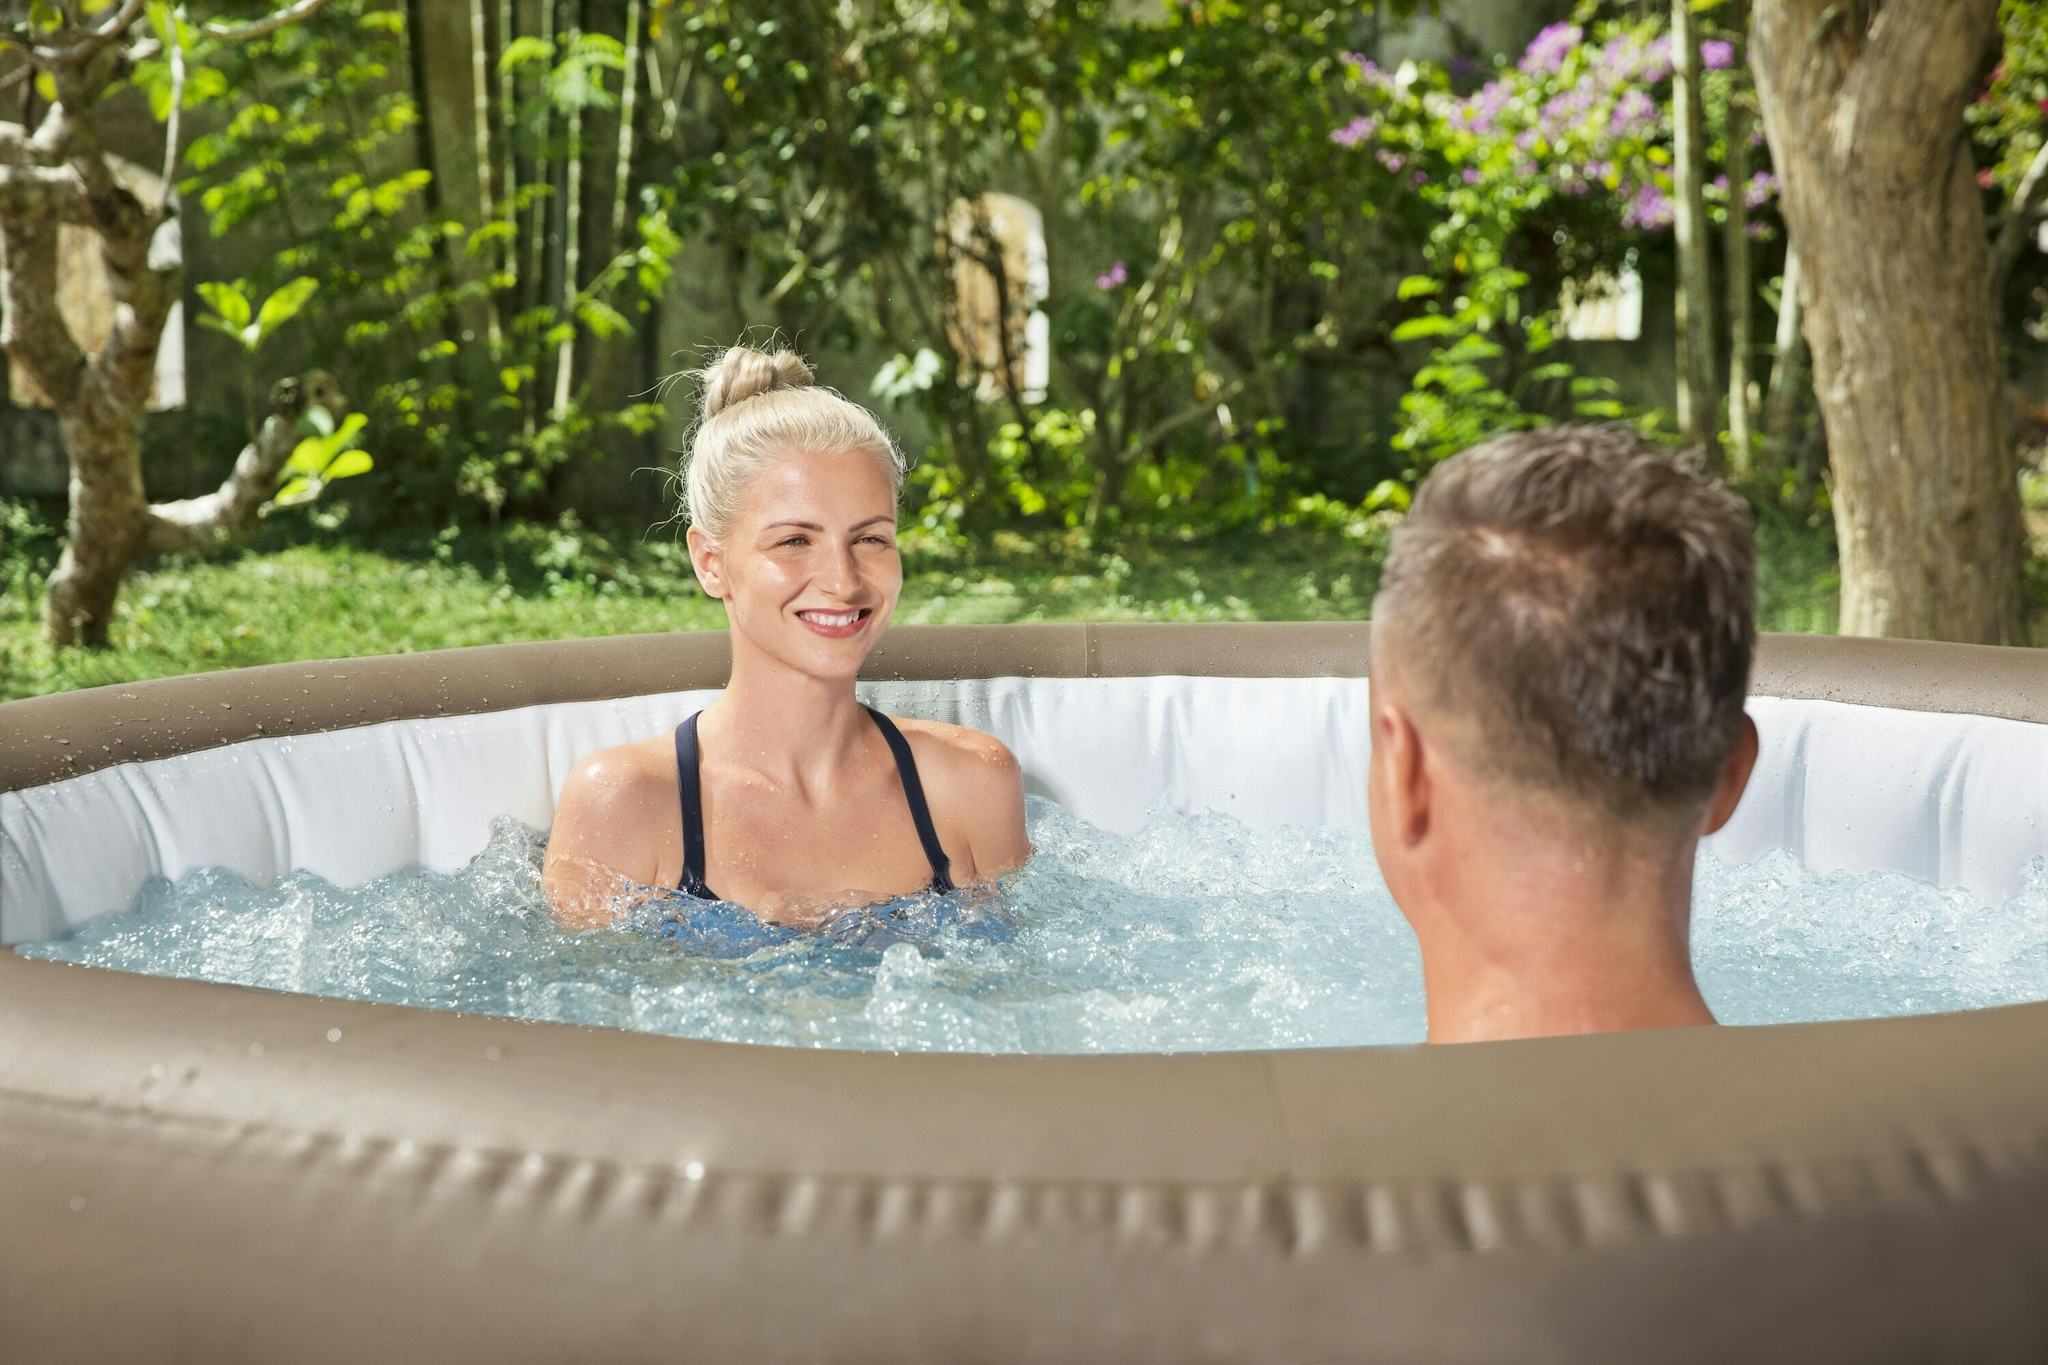 Spas Gonflables Spa gonflable rond Lay-Z-Spa Palm Springs Airjet™ 4 - 6 personnes Bestway 6